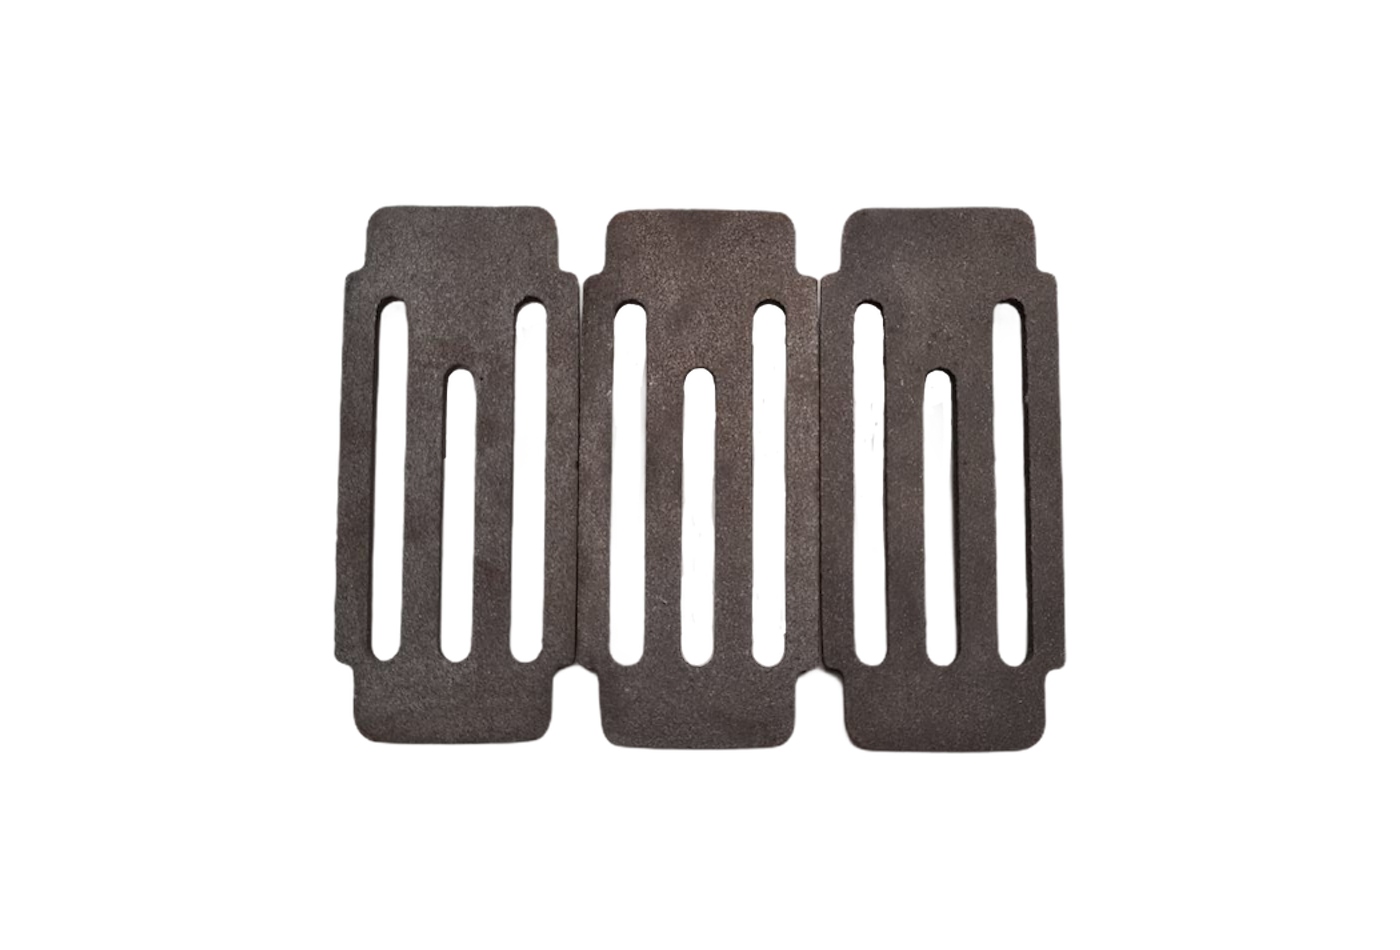 Charnwood Country 4 Grate Plate Set